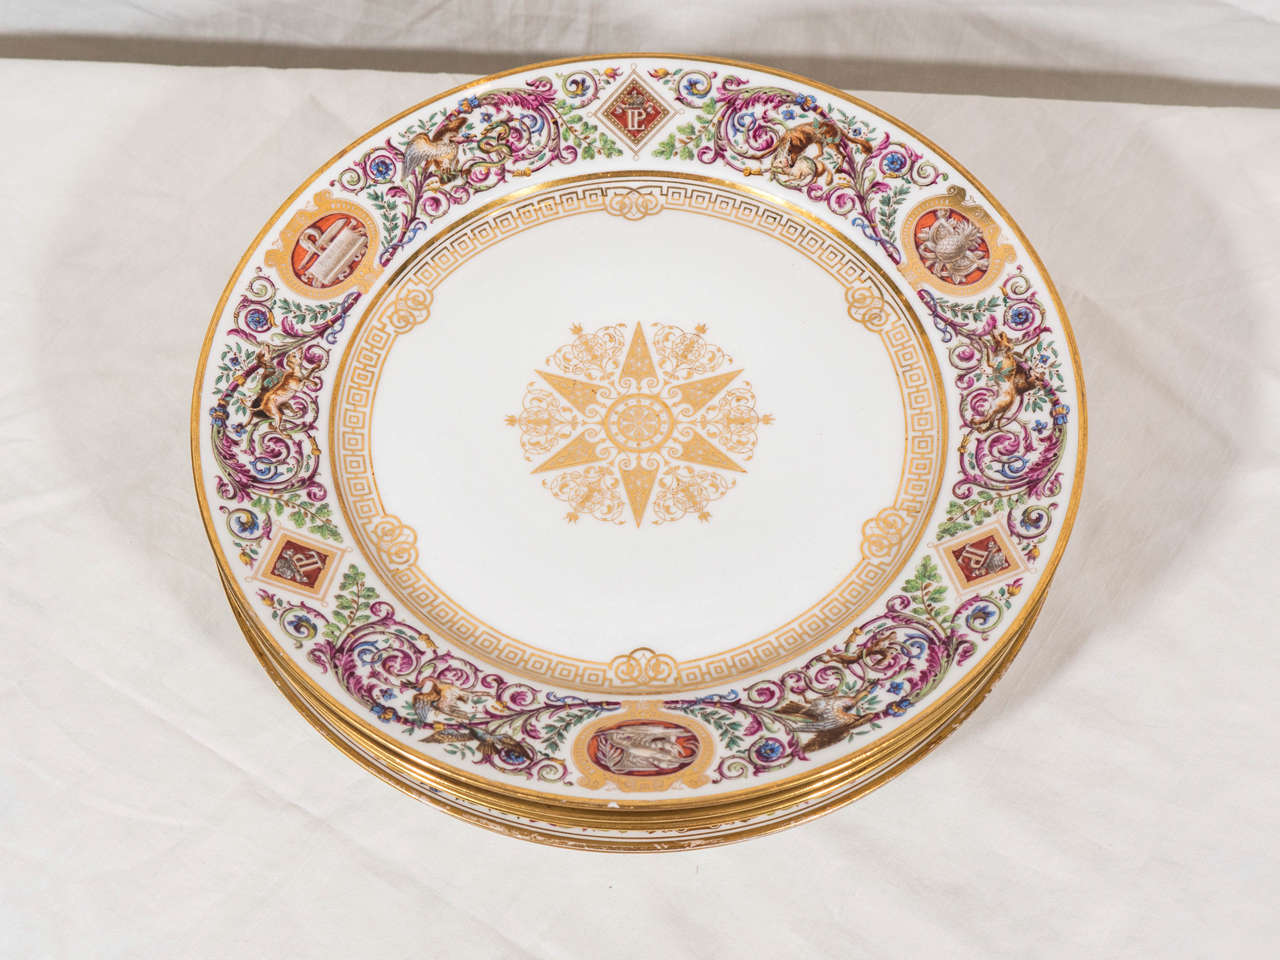 Porcelain Set of Sèvres Dishes from the Hunting Service of Louis Philippe King of France